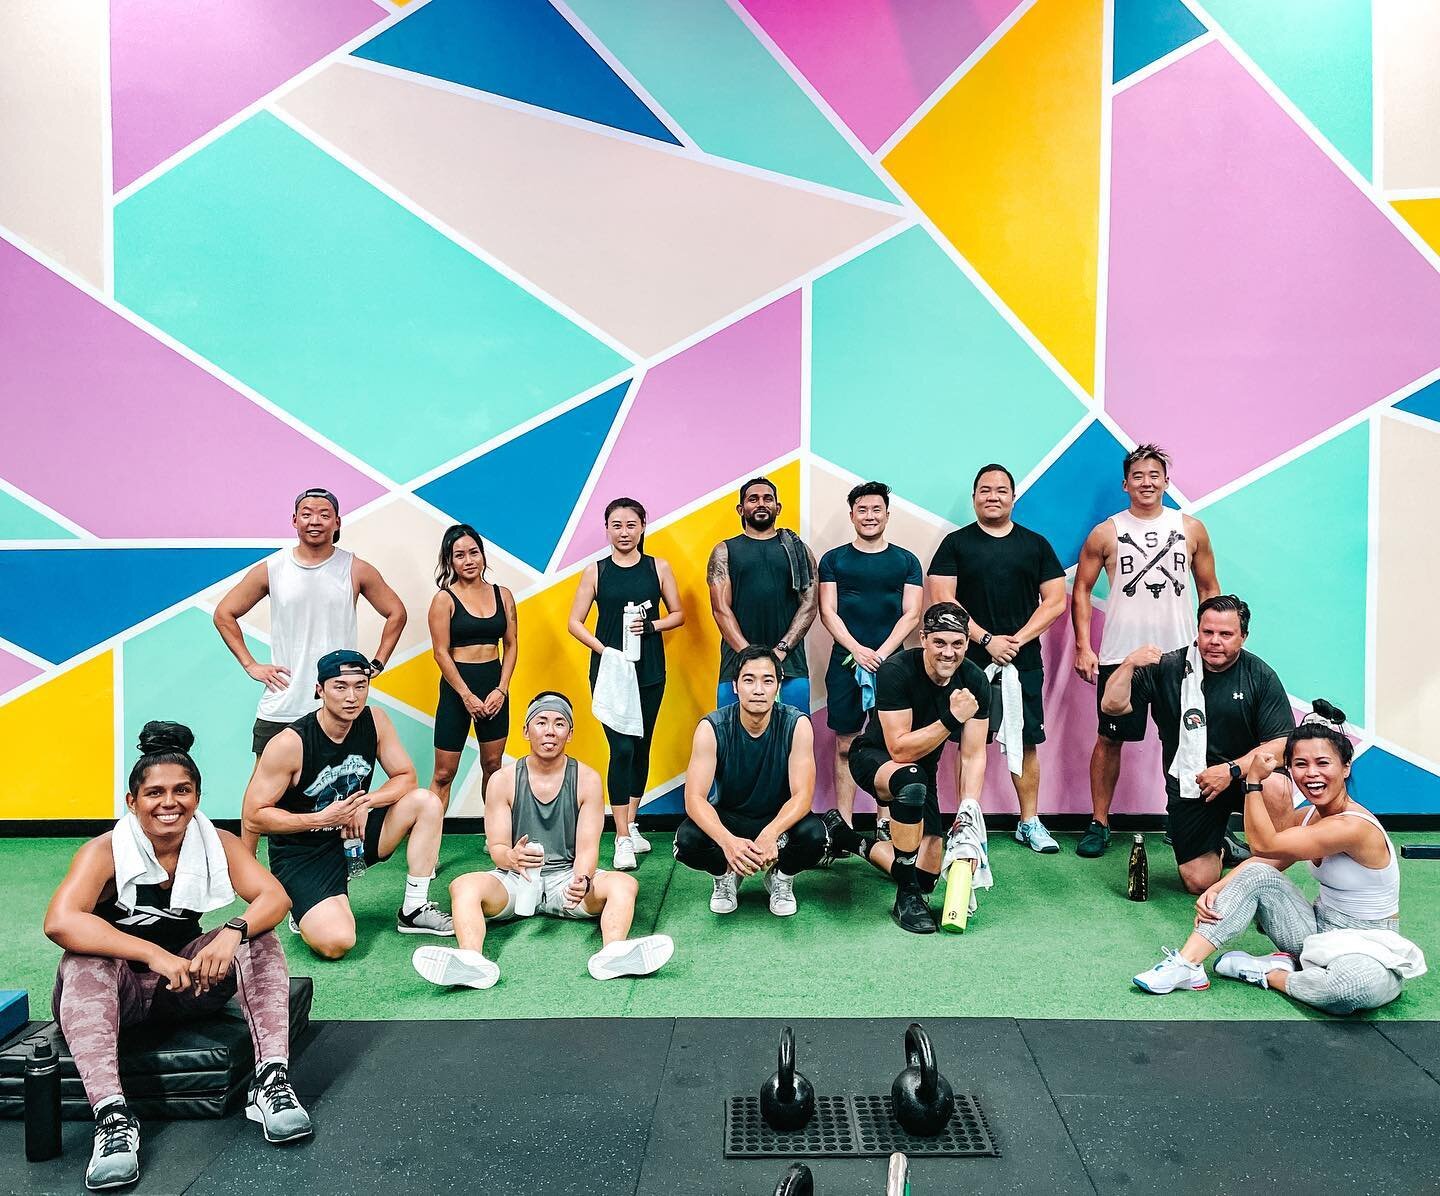 Our LEAP fam is growing! Come join the fun and sweat with us. Catered to all levels. 

Check out our website for classes and community events. 😀
Leapbodies.com 

#groupclass #taketheleap #community #workout #gym #richmond #yvr #speakeasy #fitnessstu